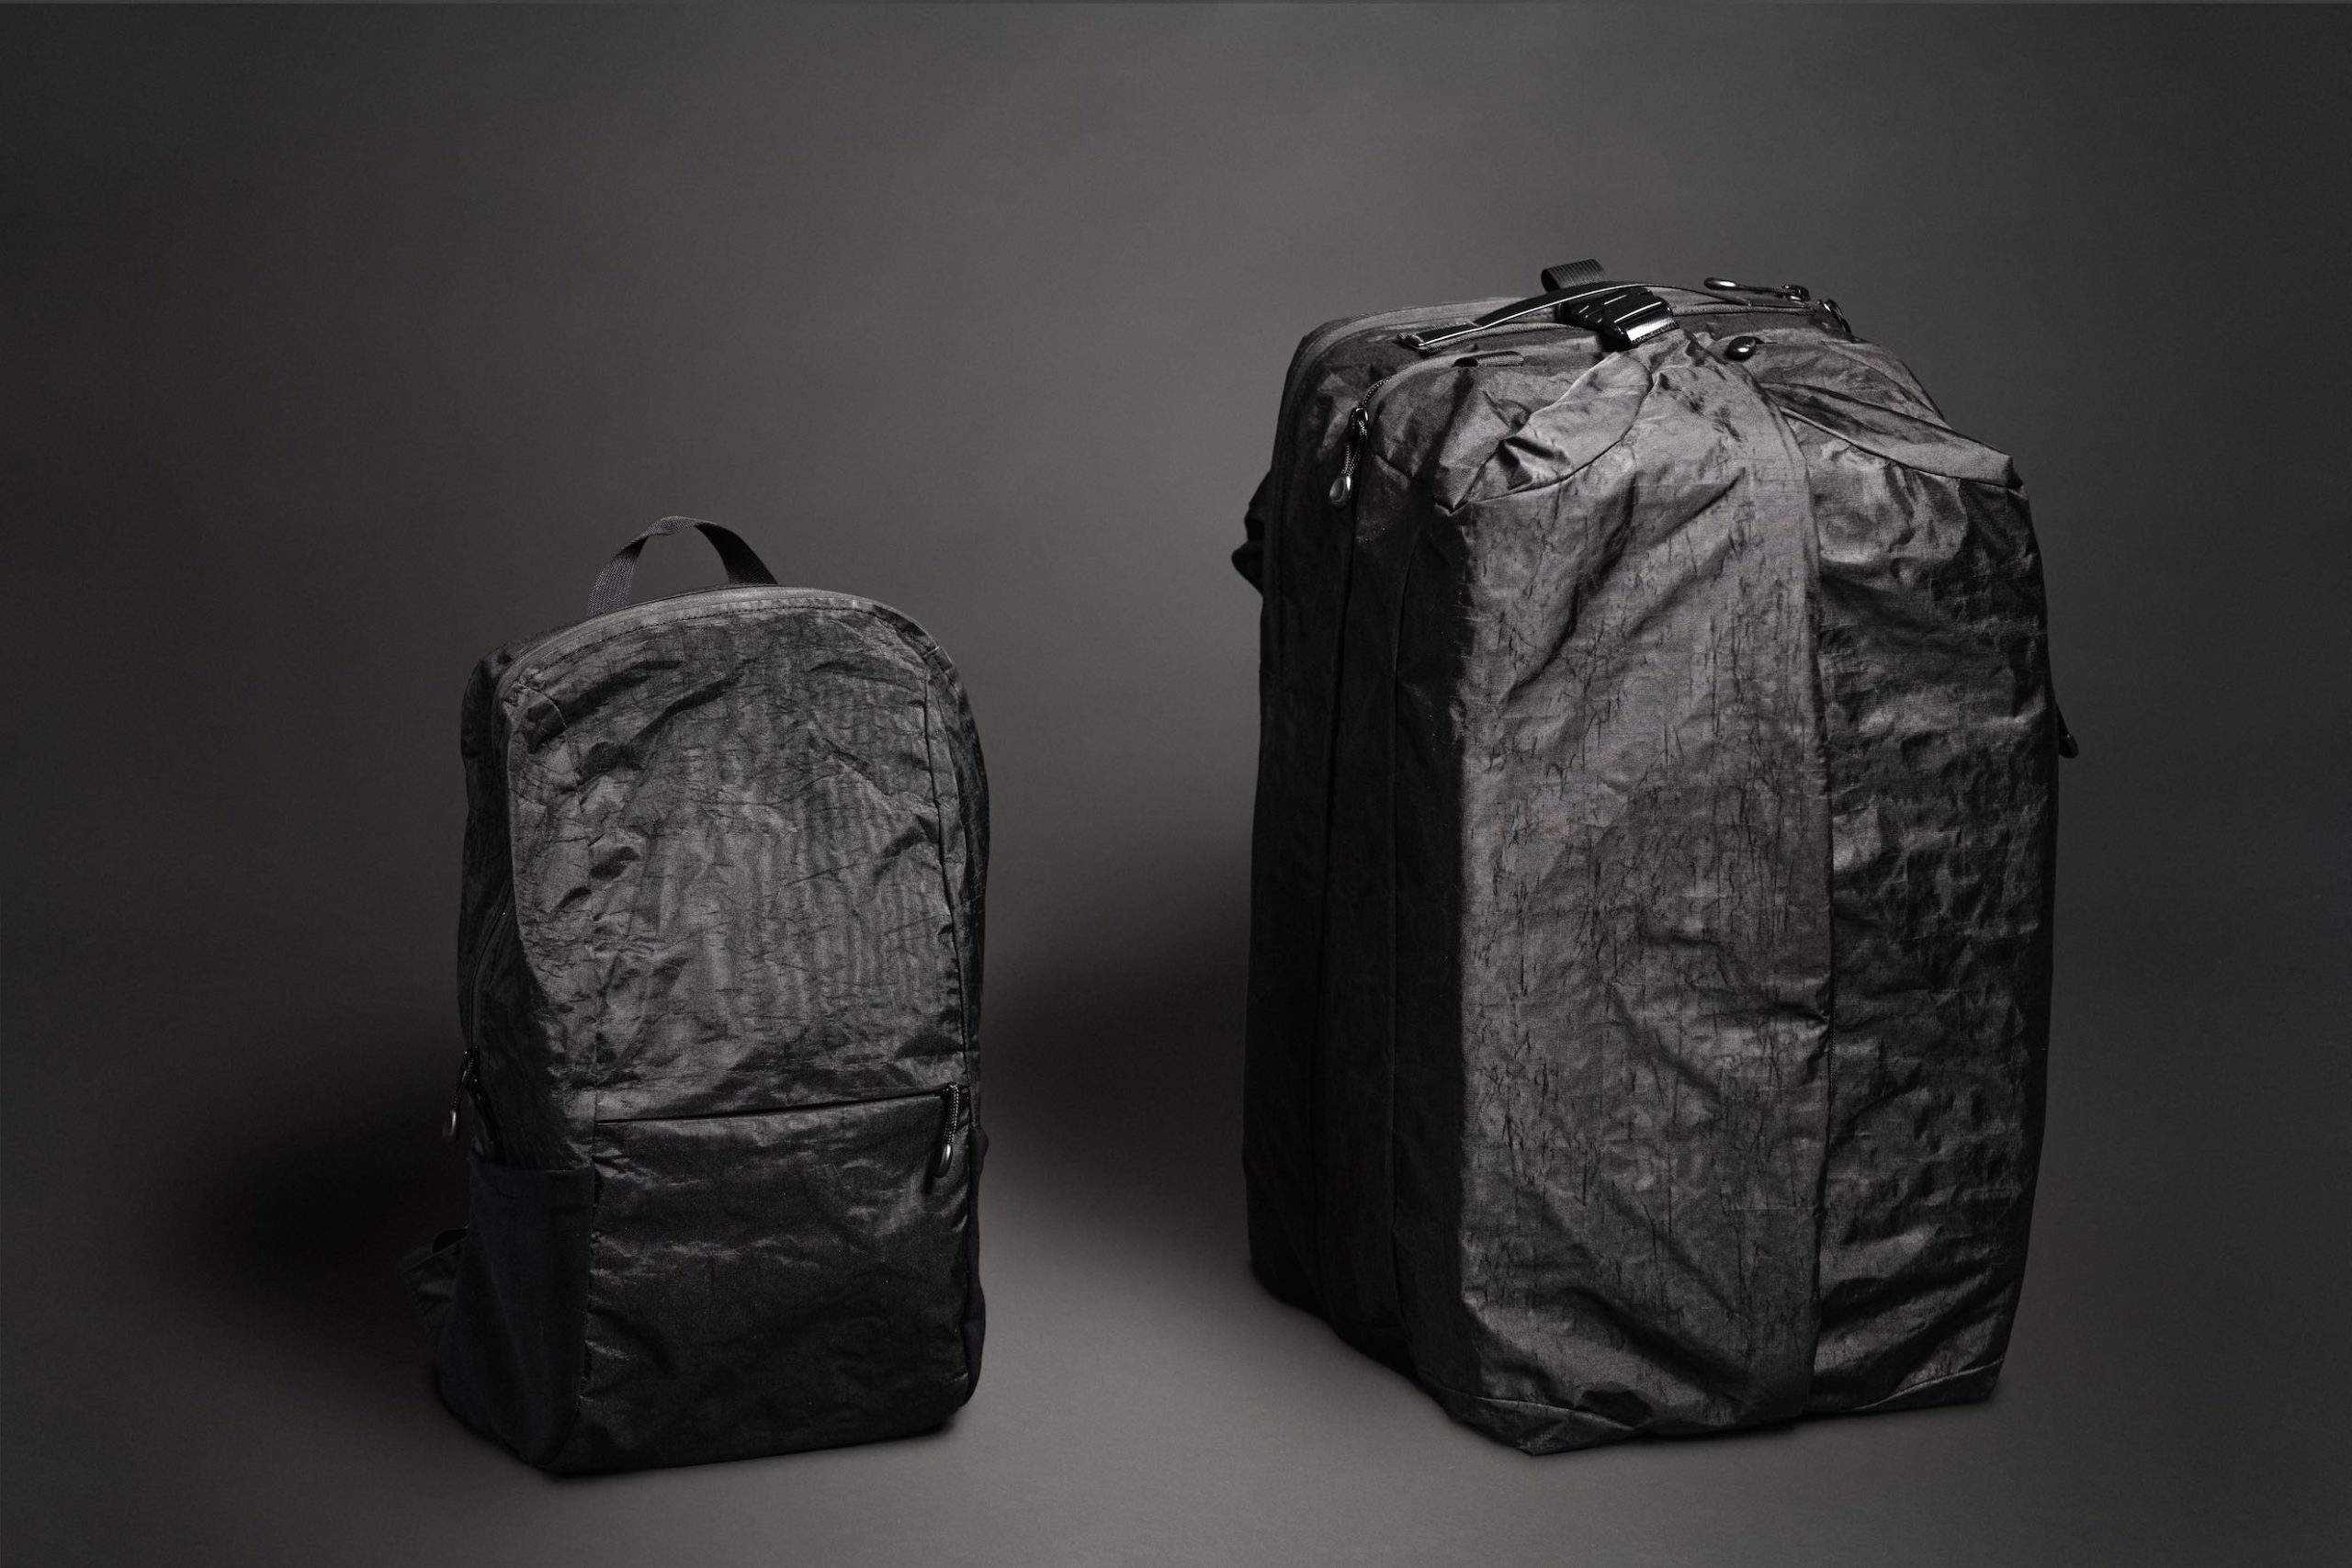 Black Mile Travel Bag Product Photography Small backpack and large black bag on display